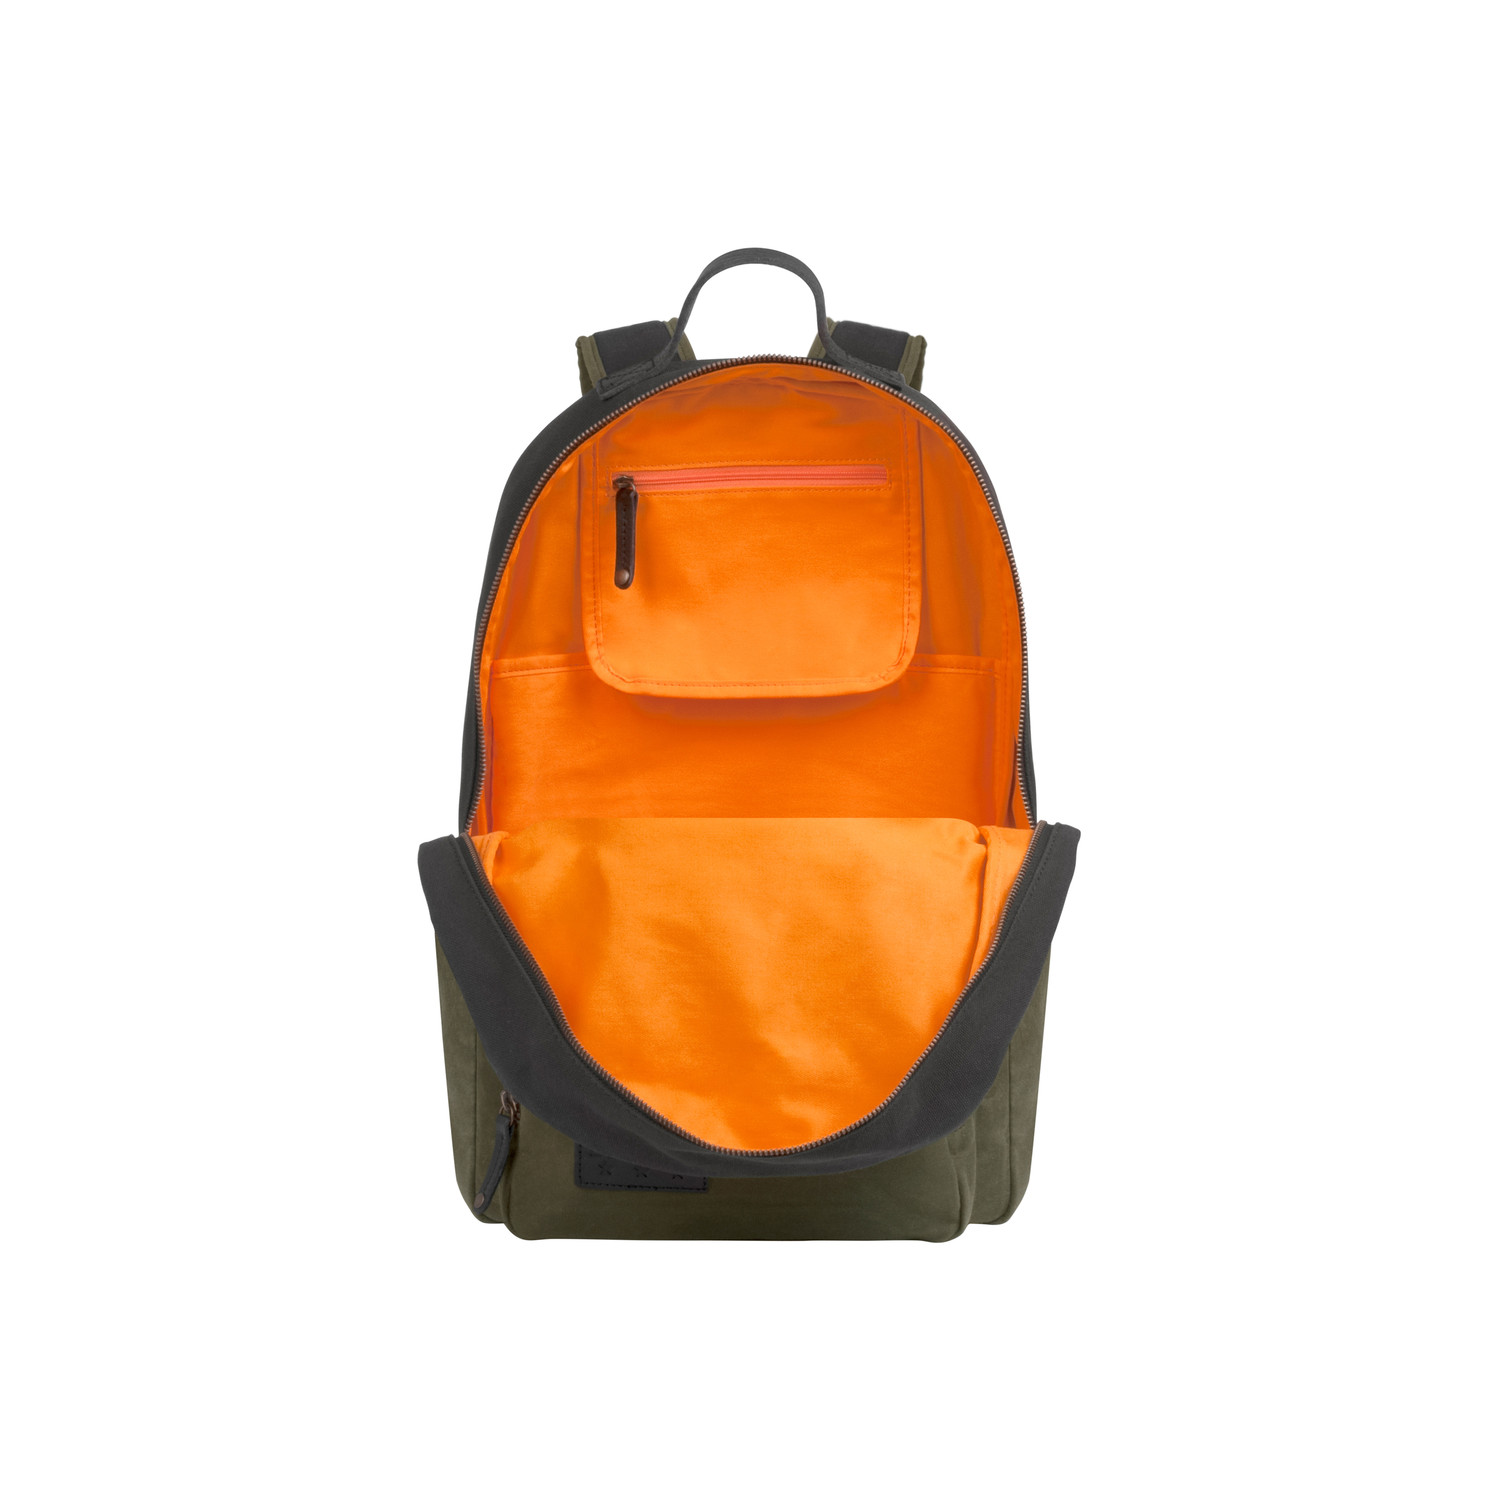 Sentry Backpack (Black + Olive) - Benrus - Touch of Modern